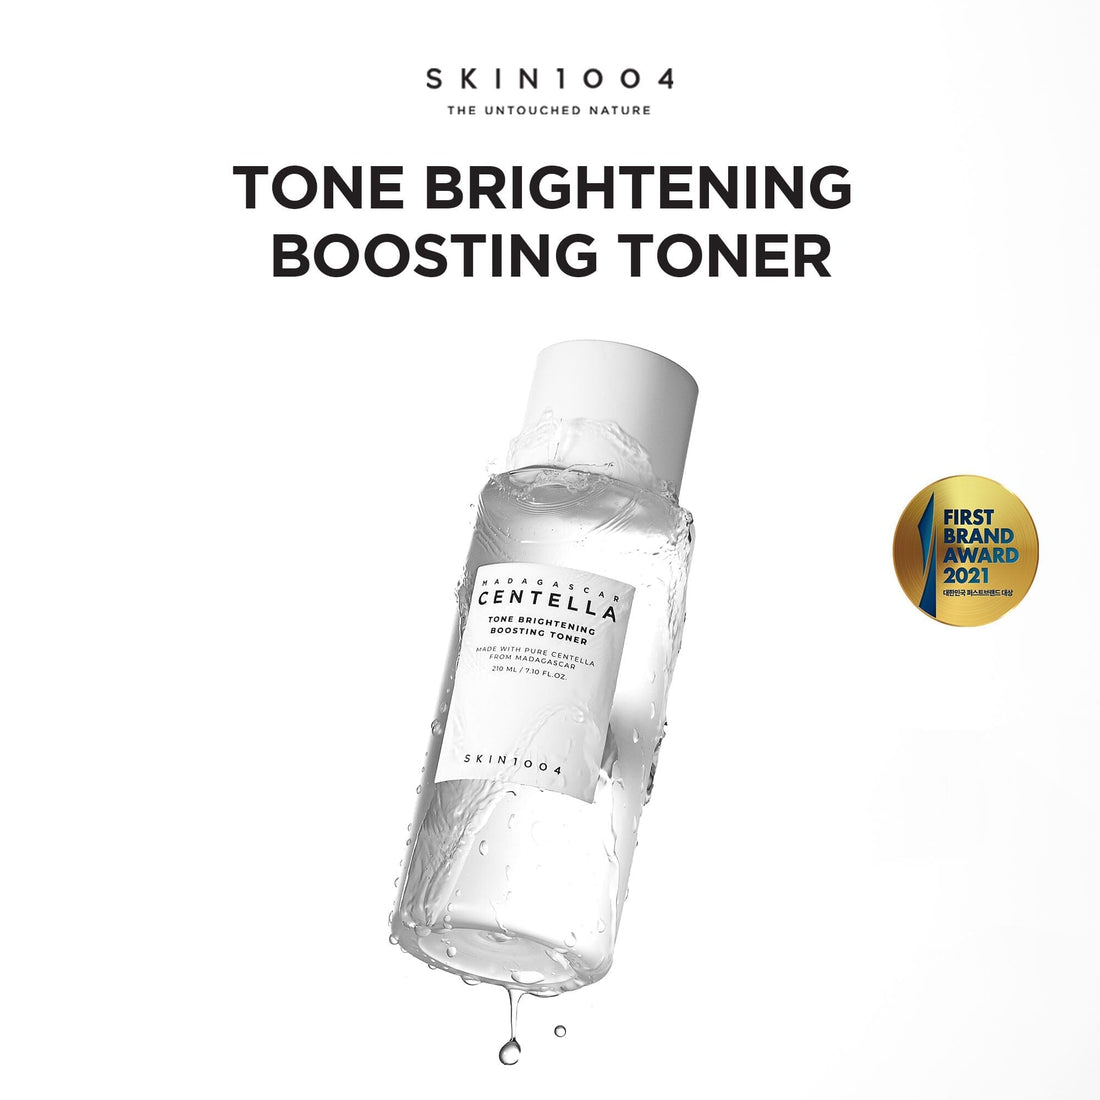 SKIN1004 Madagascar Centella Tone Brightening Boosting Toner ( Pouch Sample ), at Orion Beauty. SKIN1004 Official Sole Authorized Retailer in Sri Lanka!